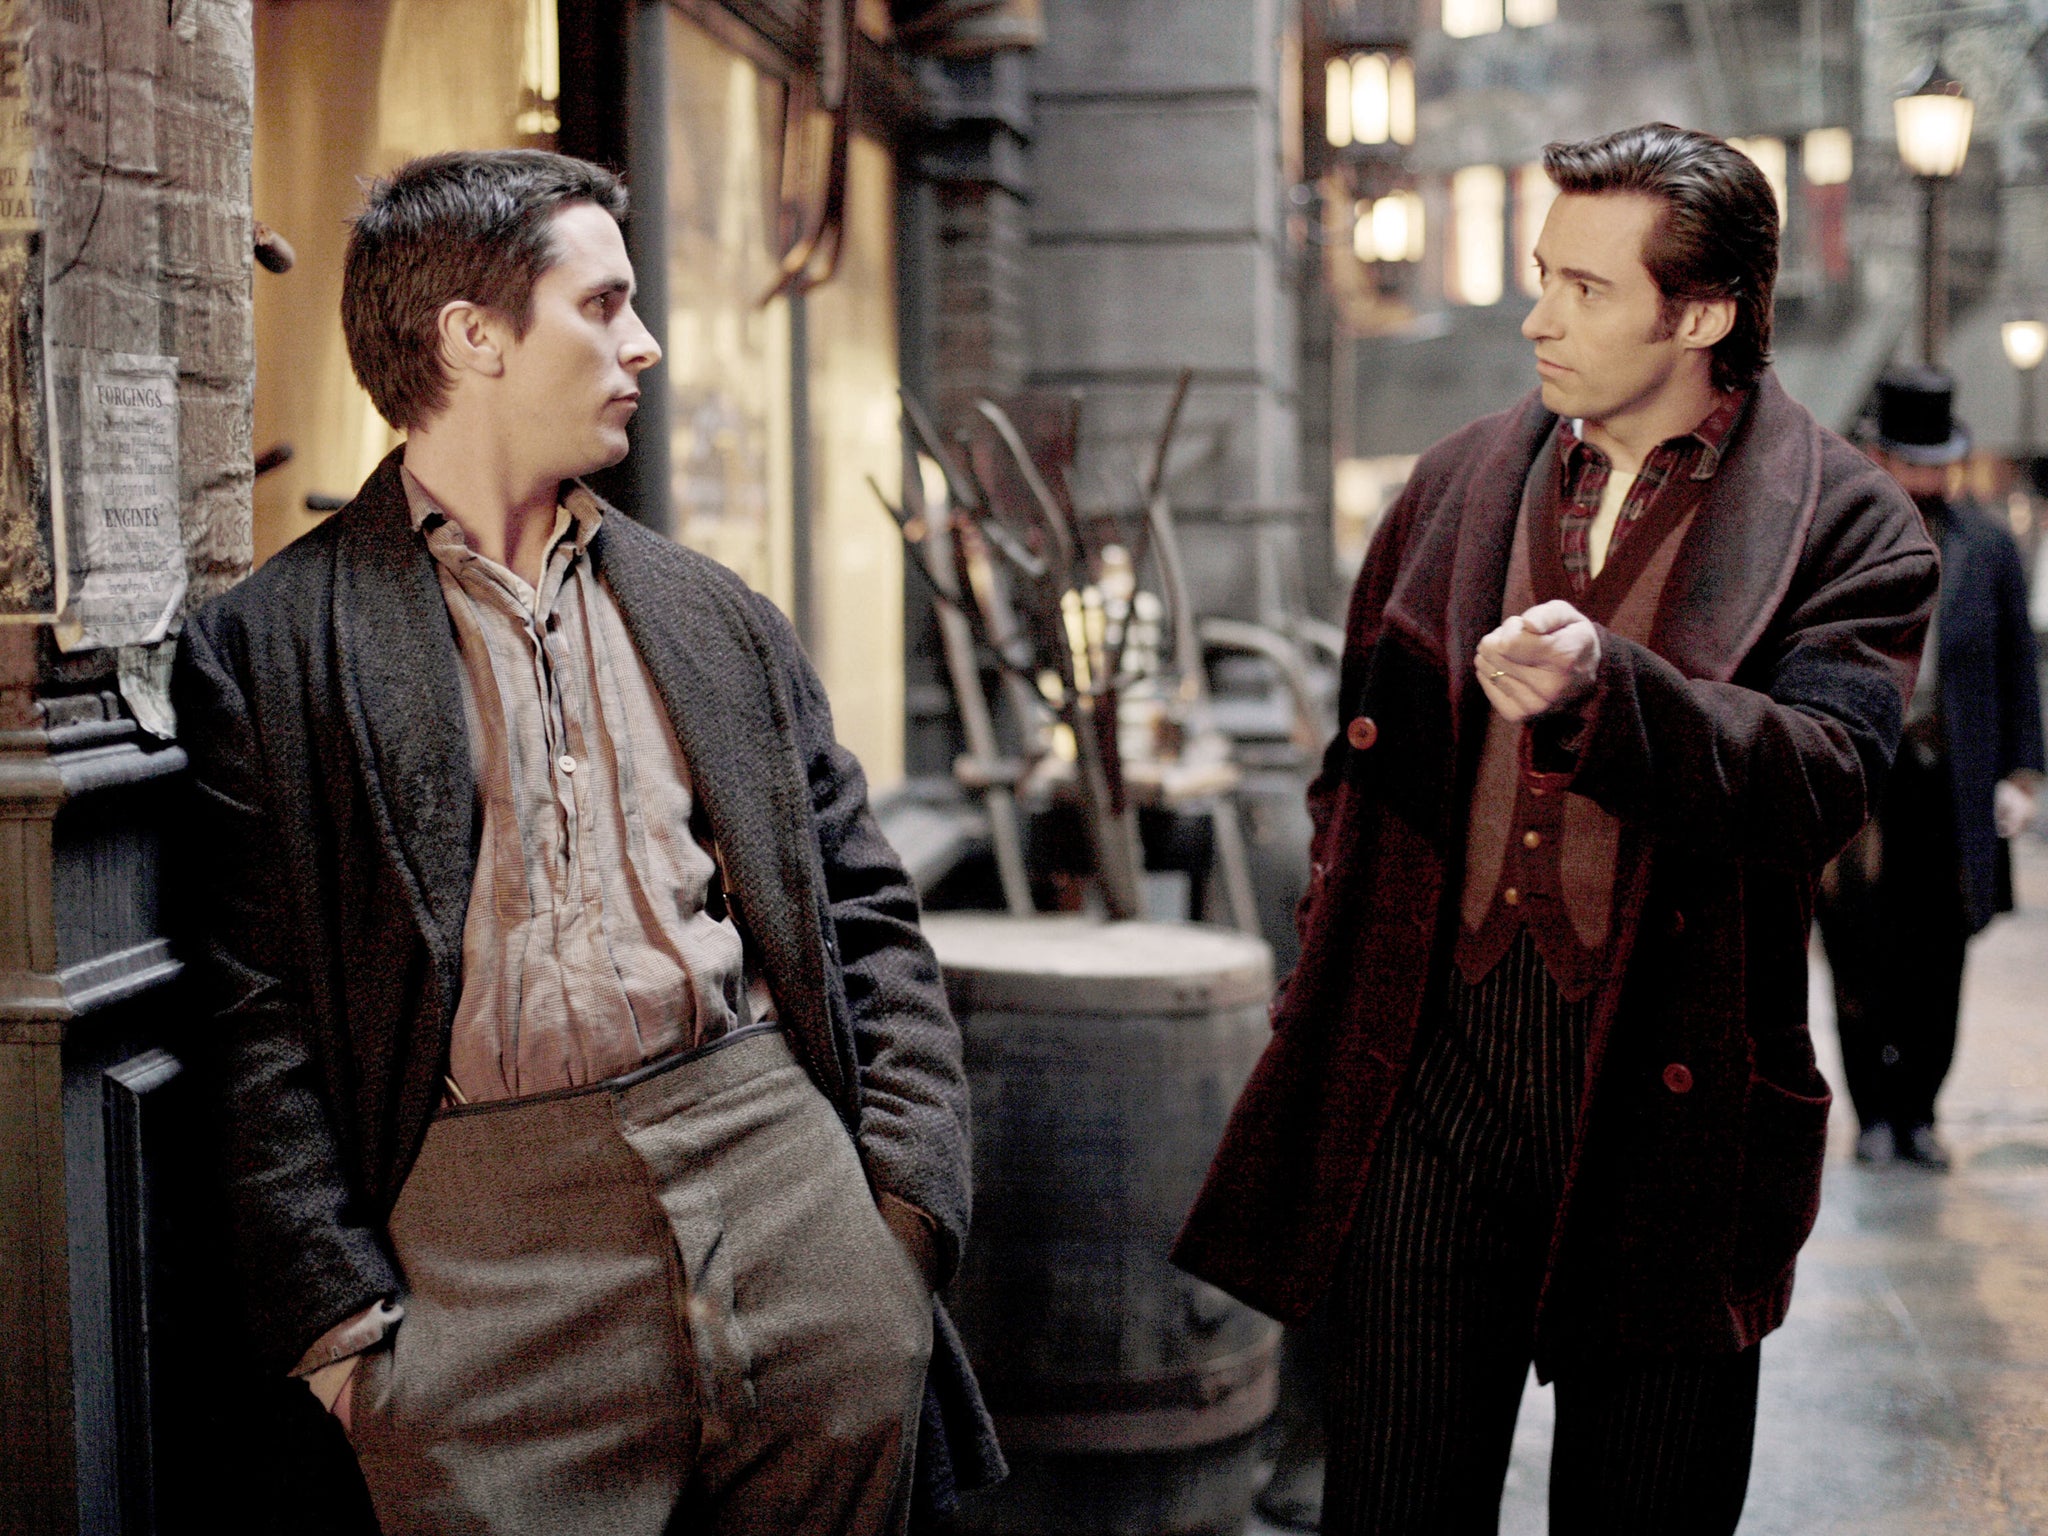 ‘The Prestige’ depicts two warring magicians: Alfred Borden (Christian Bale) and Robert Angier (Hugh Jackman)